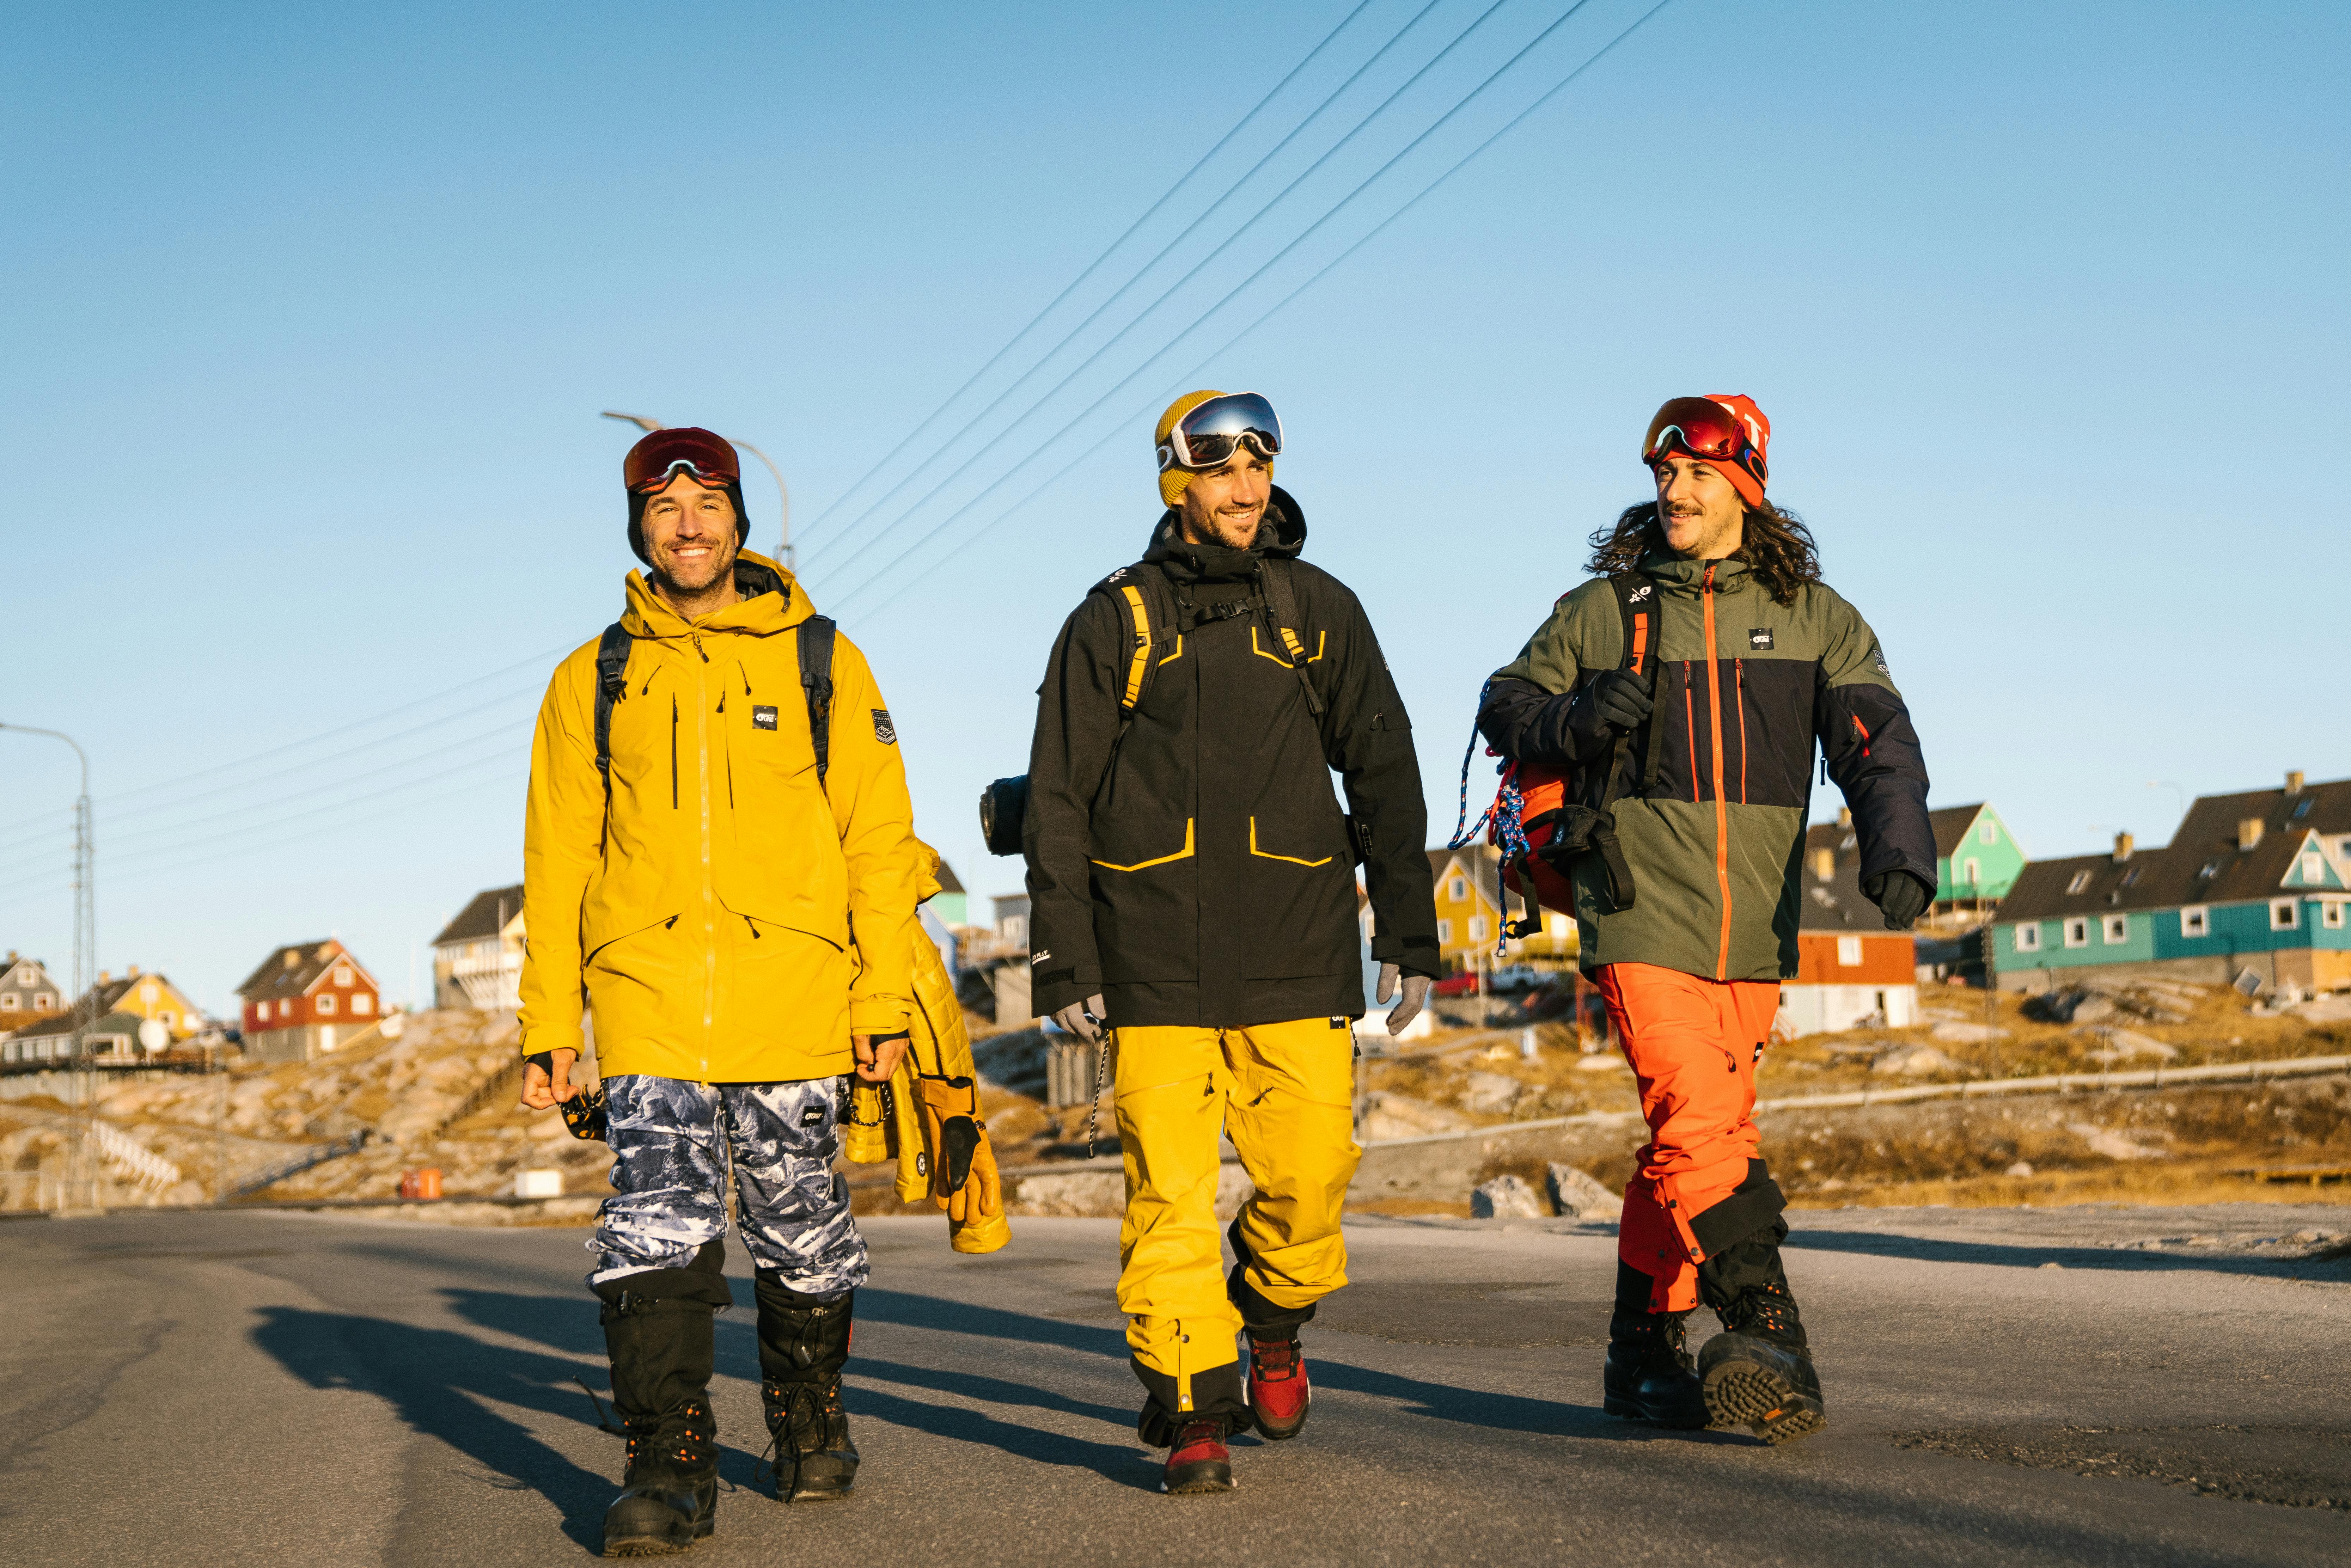 Three boarders walking down the street wearing winter sports jackets and pants